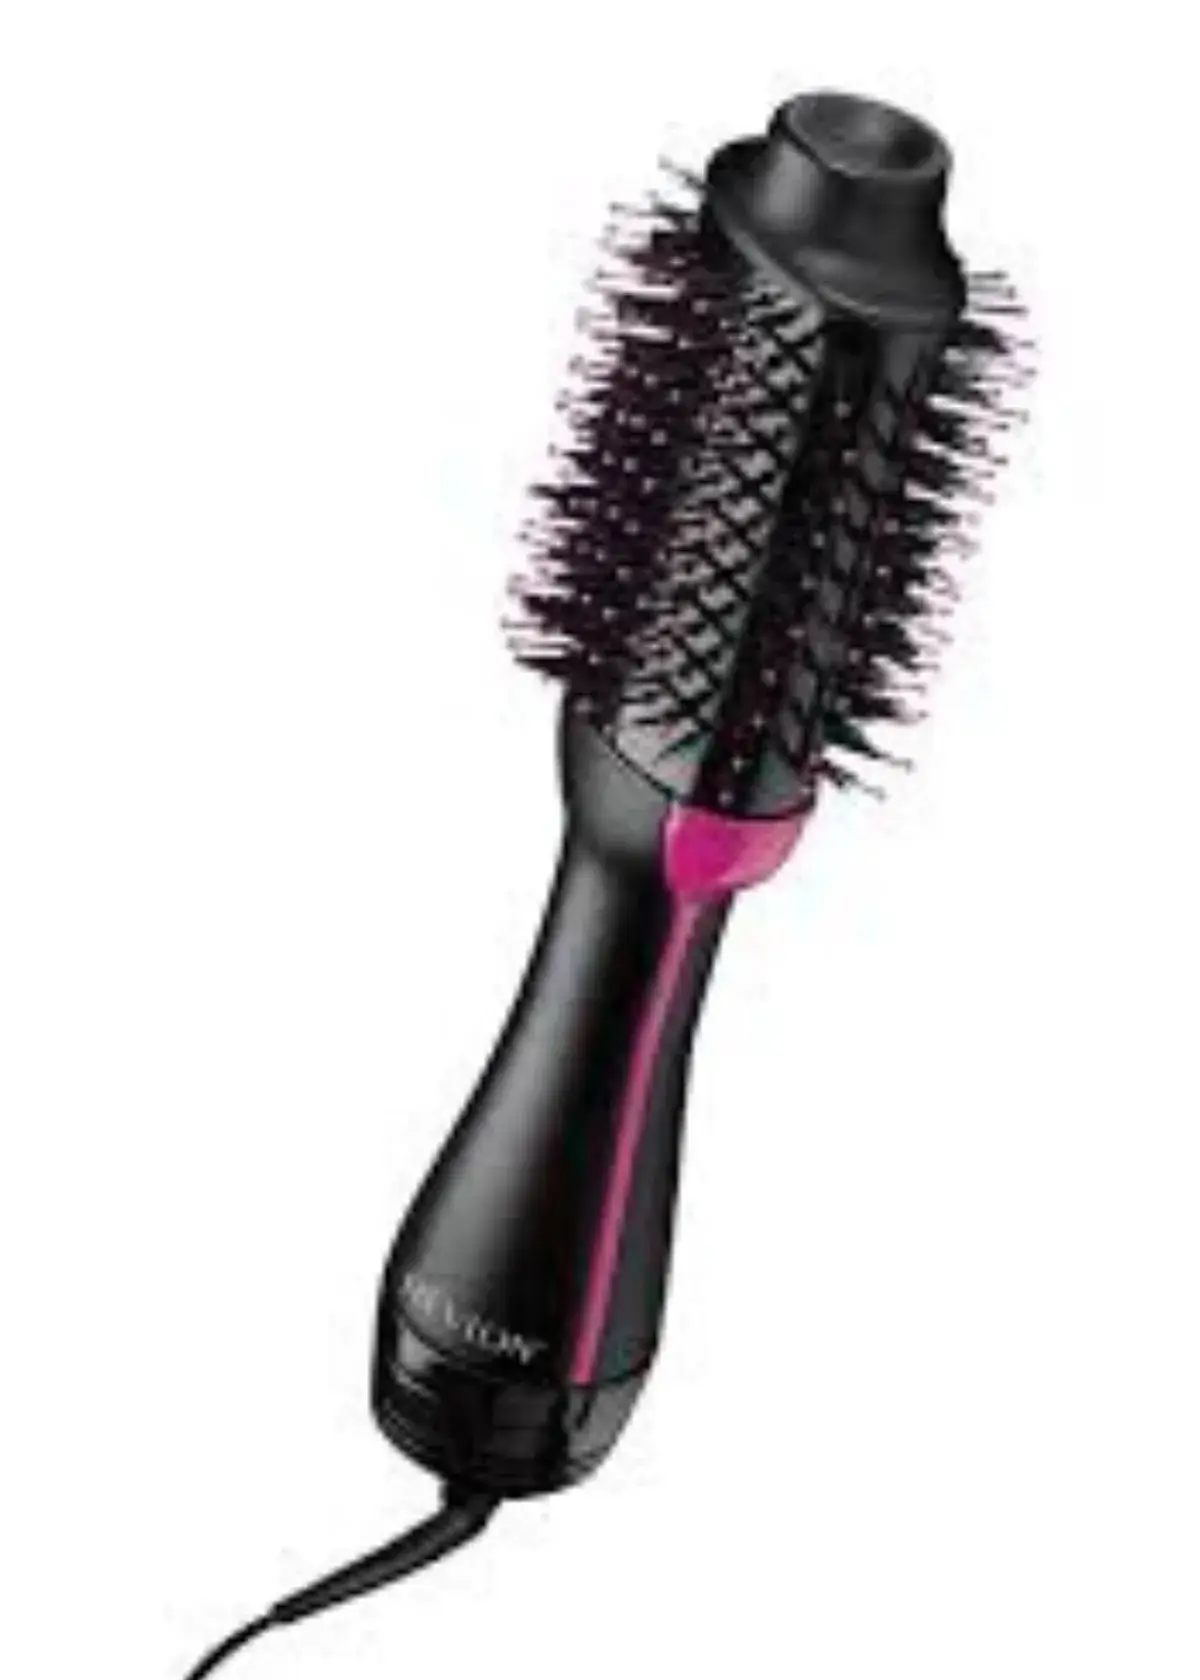 Can a hot curling brush be used on all hair types?